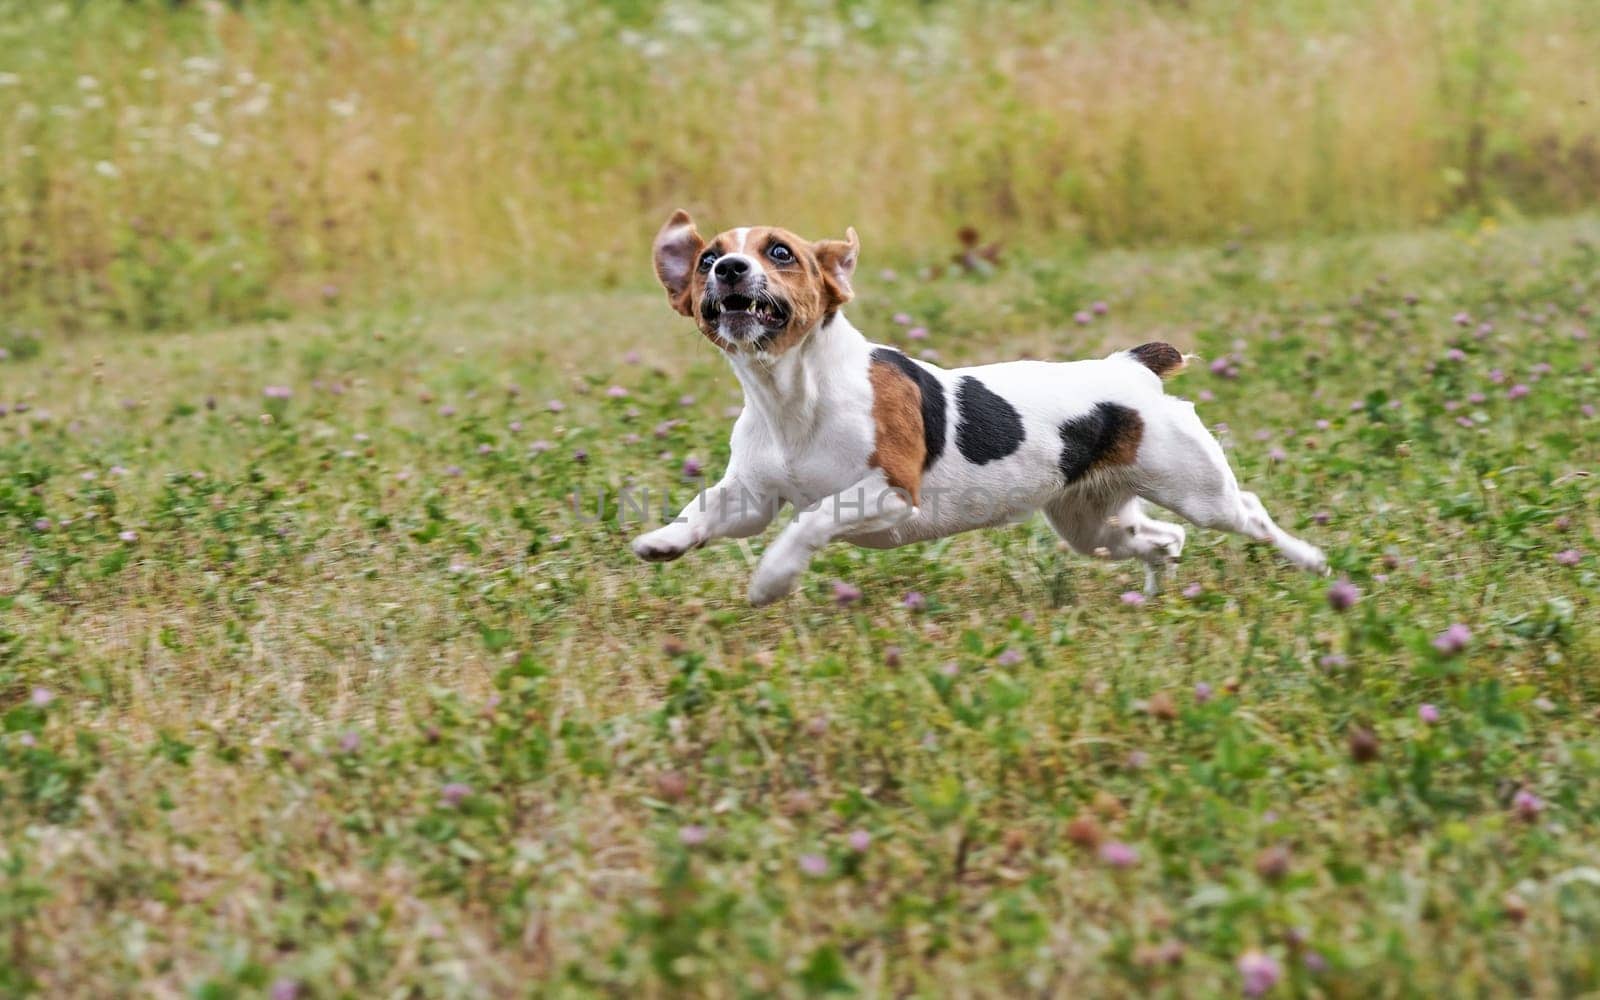 Jack Russell terrier running fast on grass meadow, mouth open, head looking up at the ball thrown to her